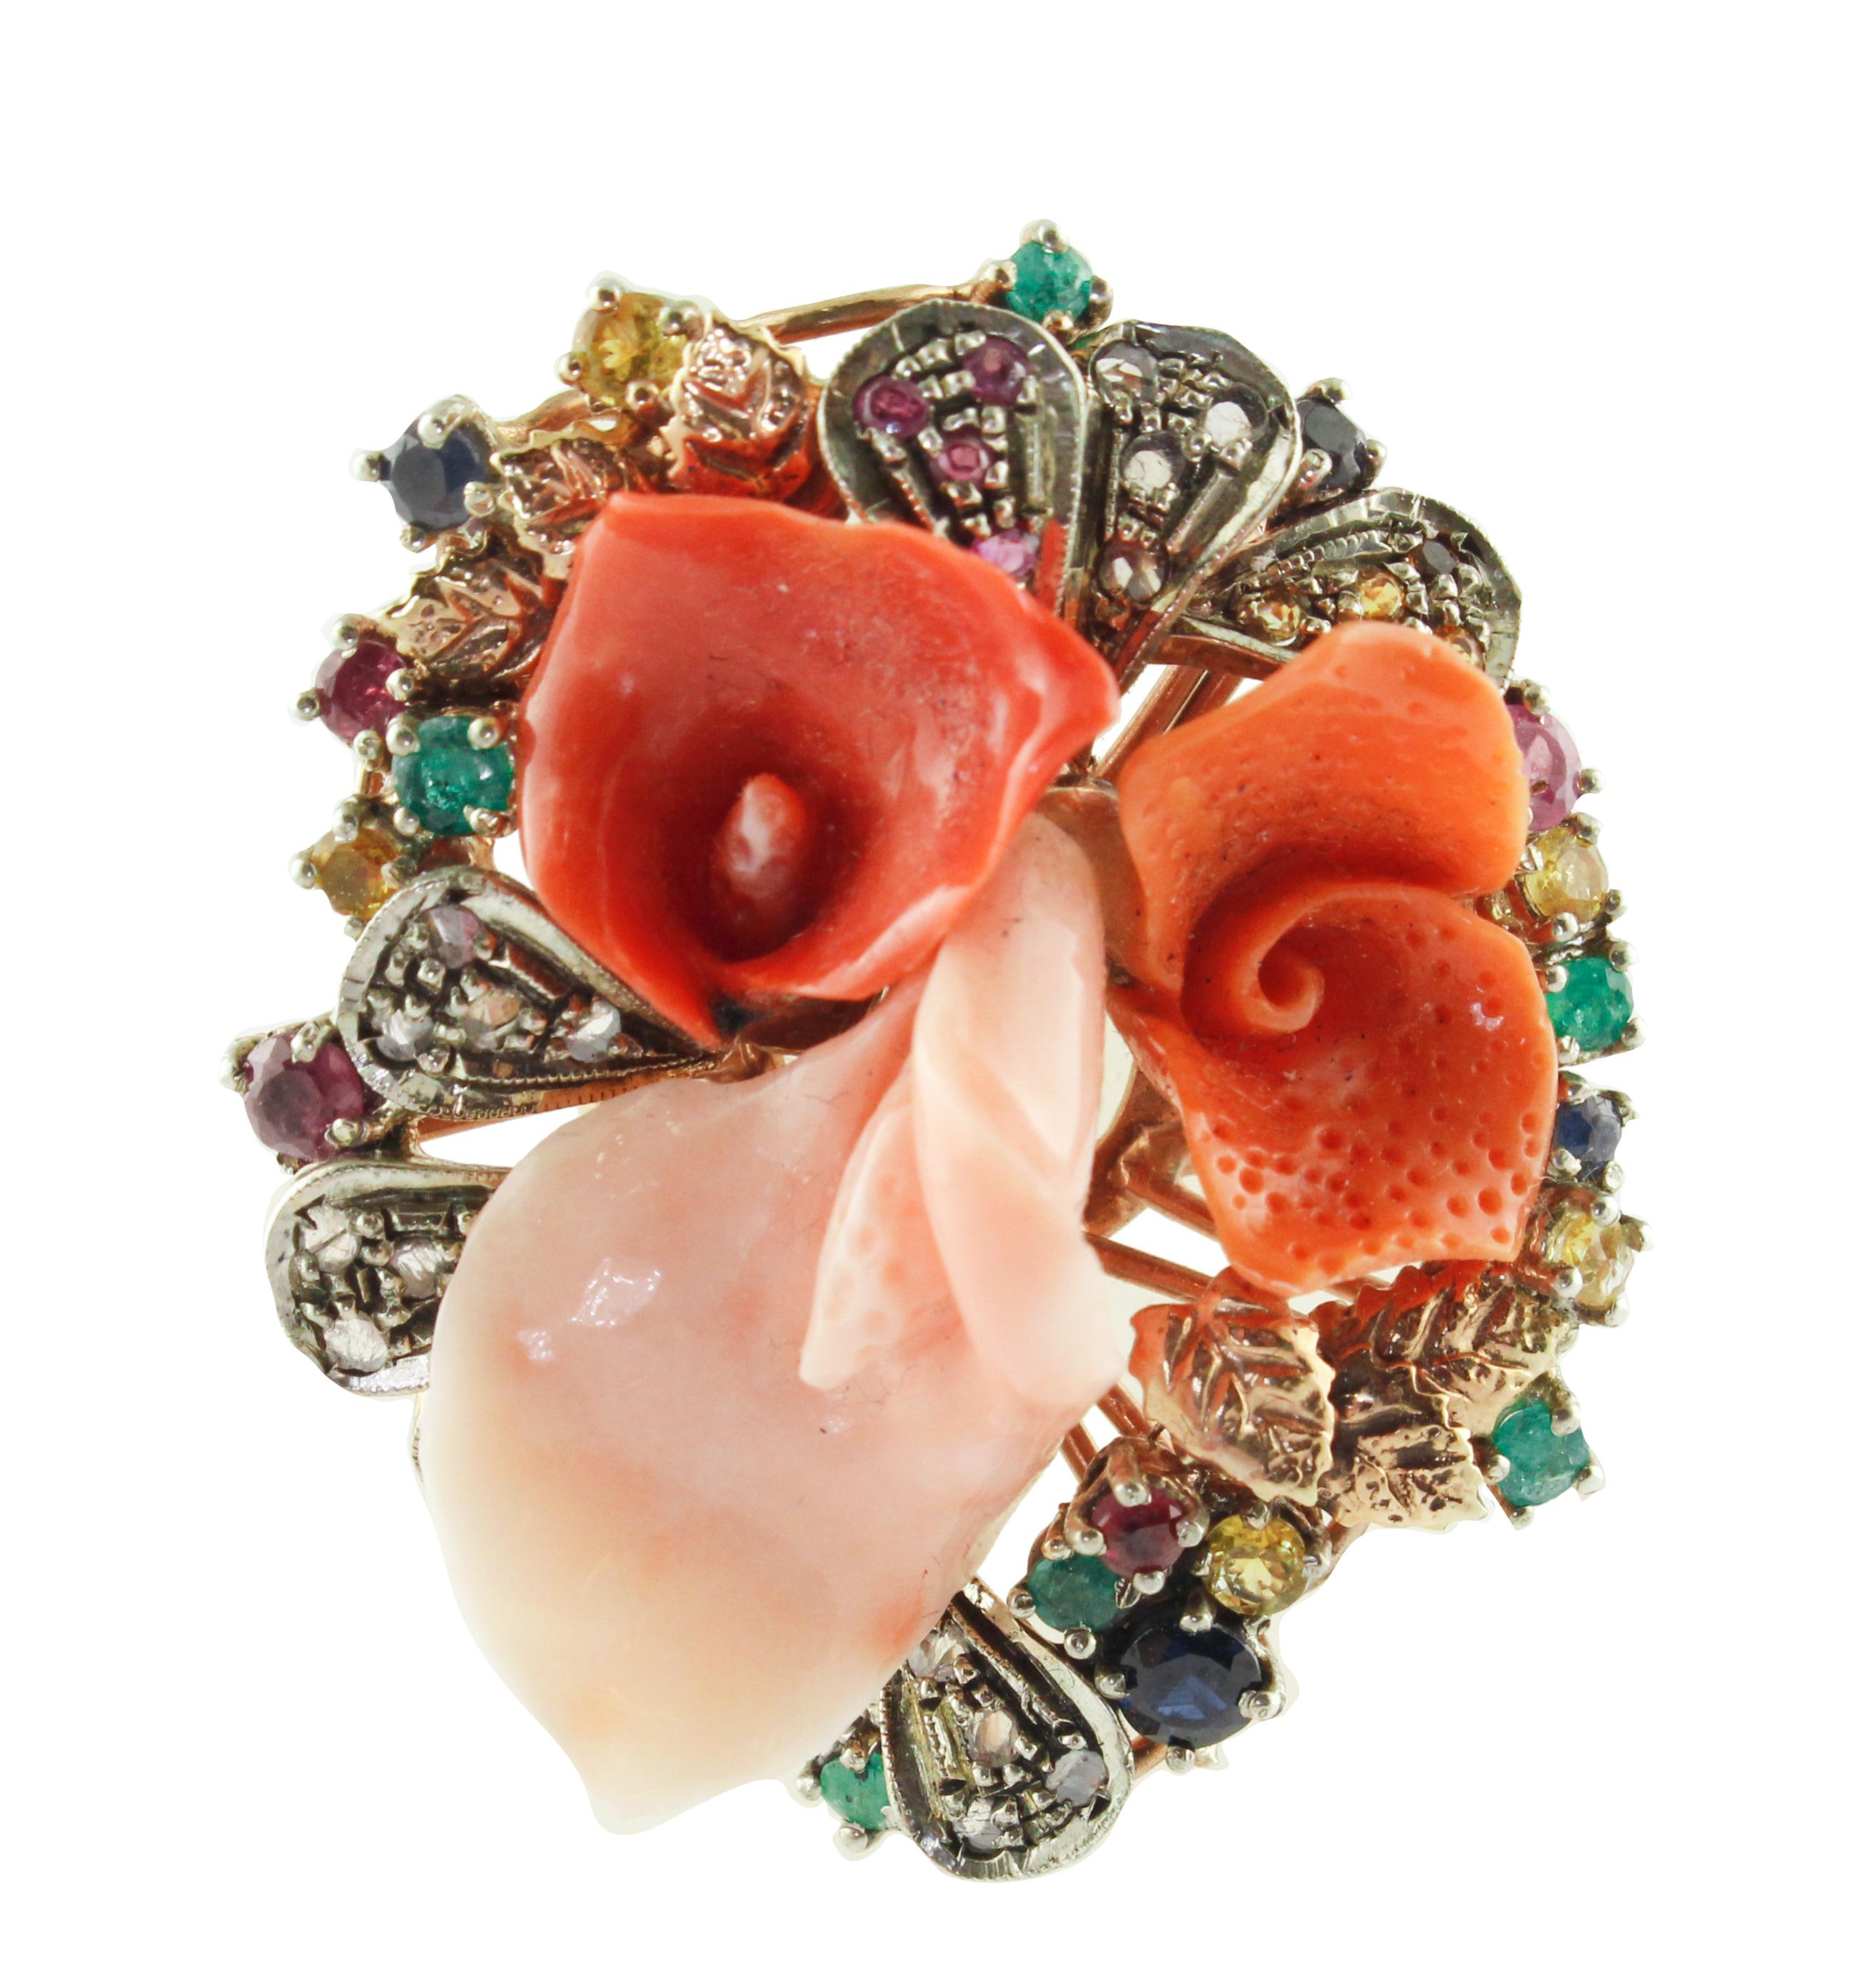 Fashion flower ring in 9K rose gold and silver structure composed by 3 coral petals in the center ( one pink, one orange, one red) and it is studded all around by diamonds, rubies, emeralds, blue sapphires, and yellow sapphires.
Diamonds 0.20 ct